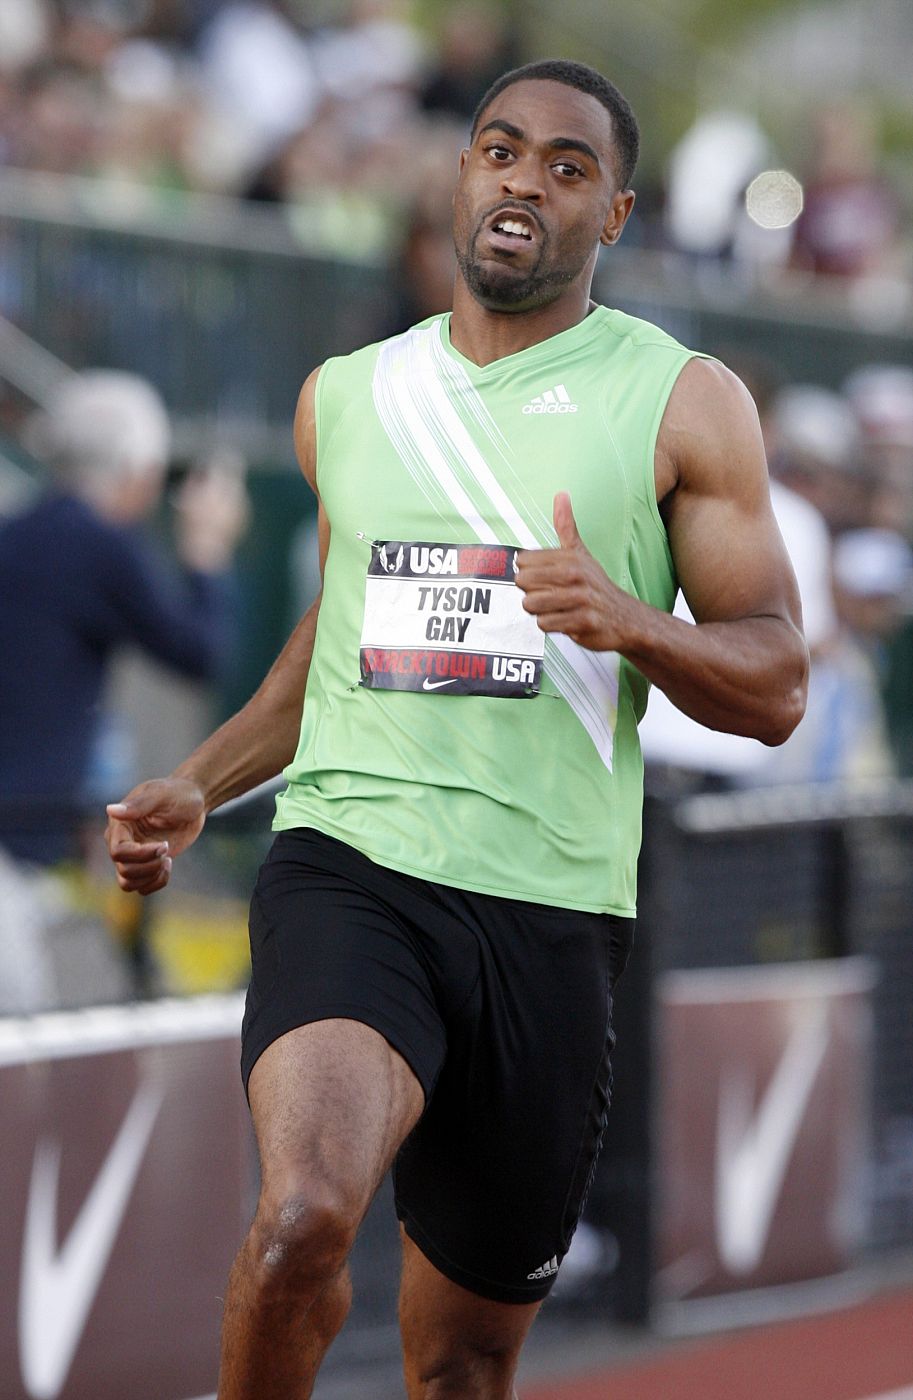 Tyson Gay finishes the men's 100 meters heat at the U.S. Outdoor Track and Field Championships in Eugene